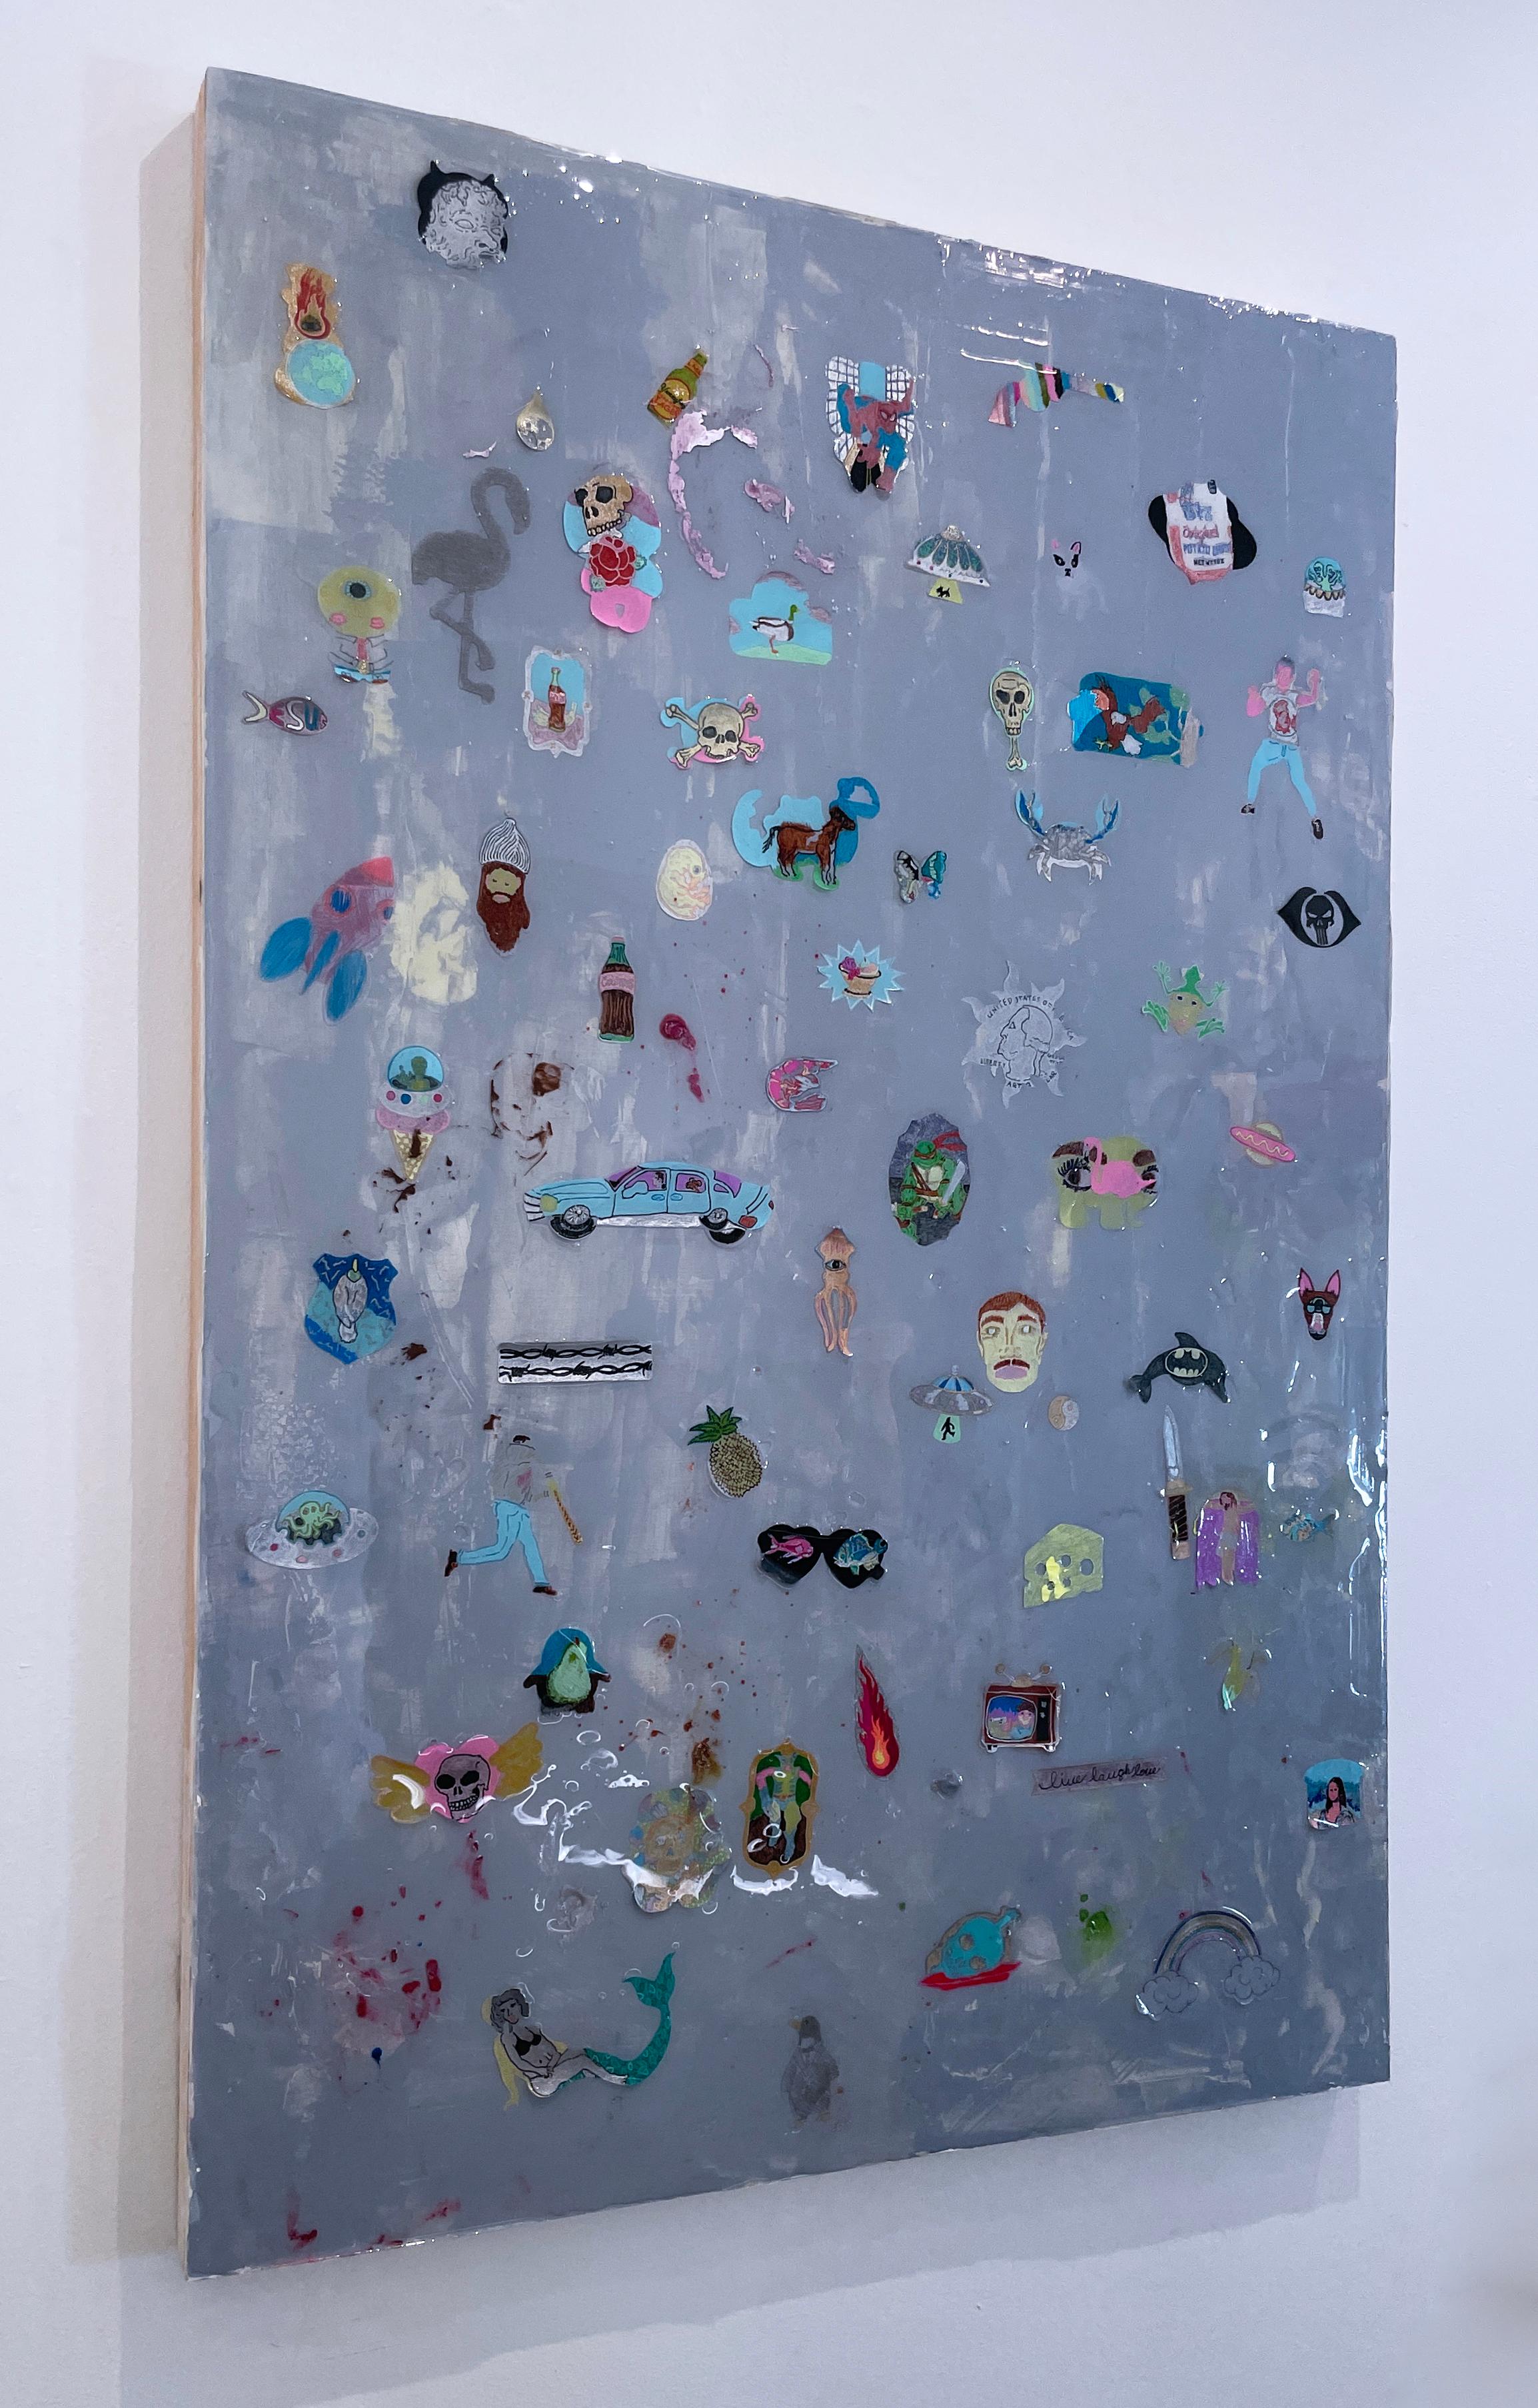 Mixed-Media / Stickers / Illustration / Pop and Contemporary Pop / Human Figure / Chess / Comic Books / Video Games / Resin / Drawing / Representations of Everyday Objects / Figurative Art / Pop Art

From Macauley Norman's solo exhibition, CRYPTIC